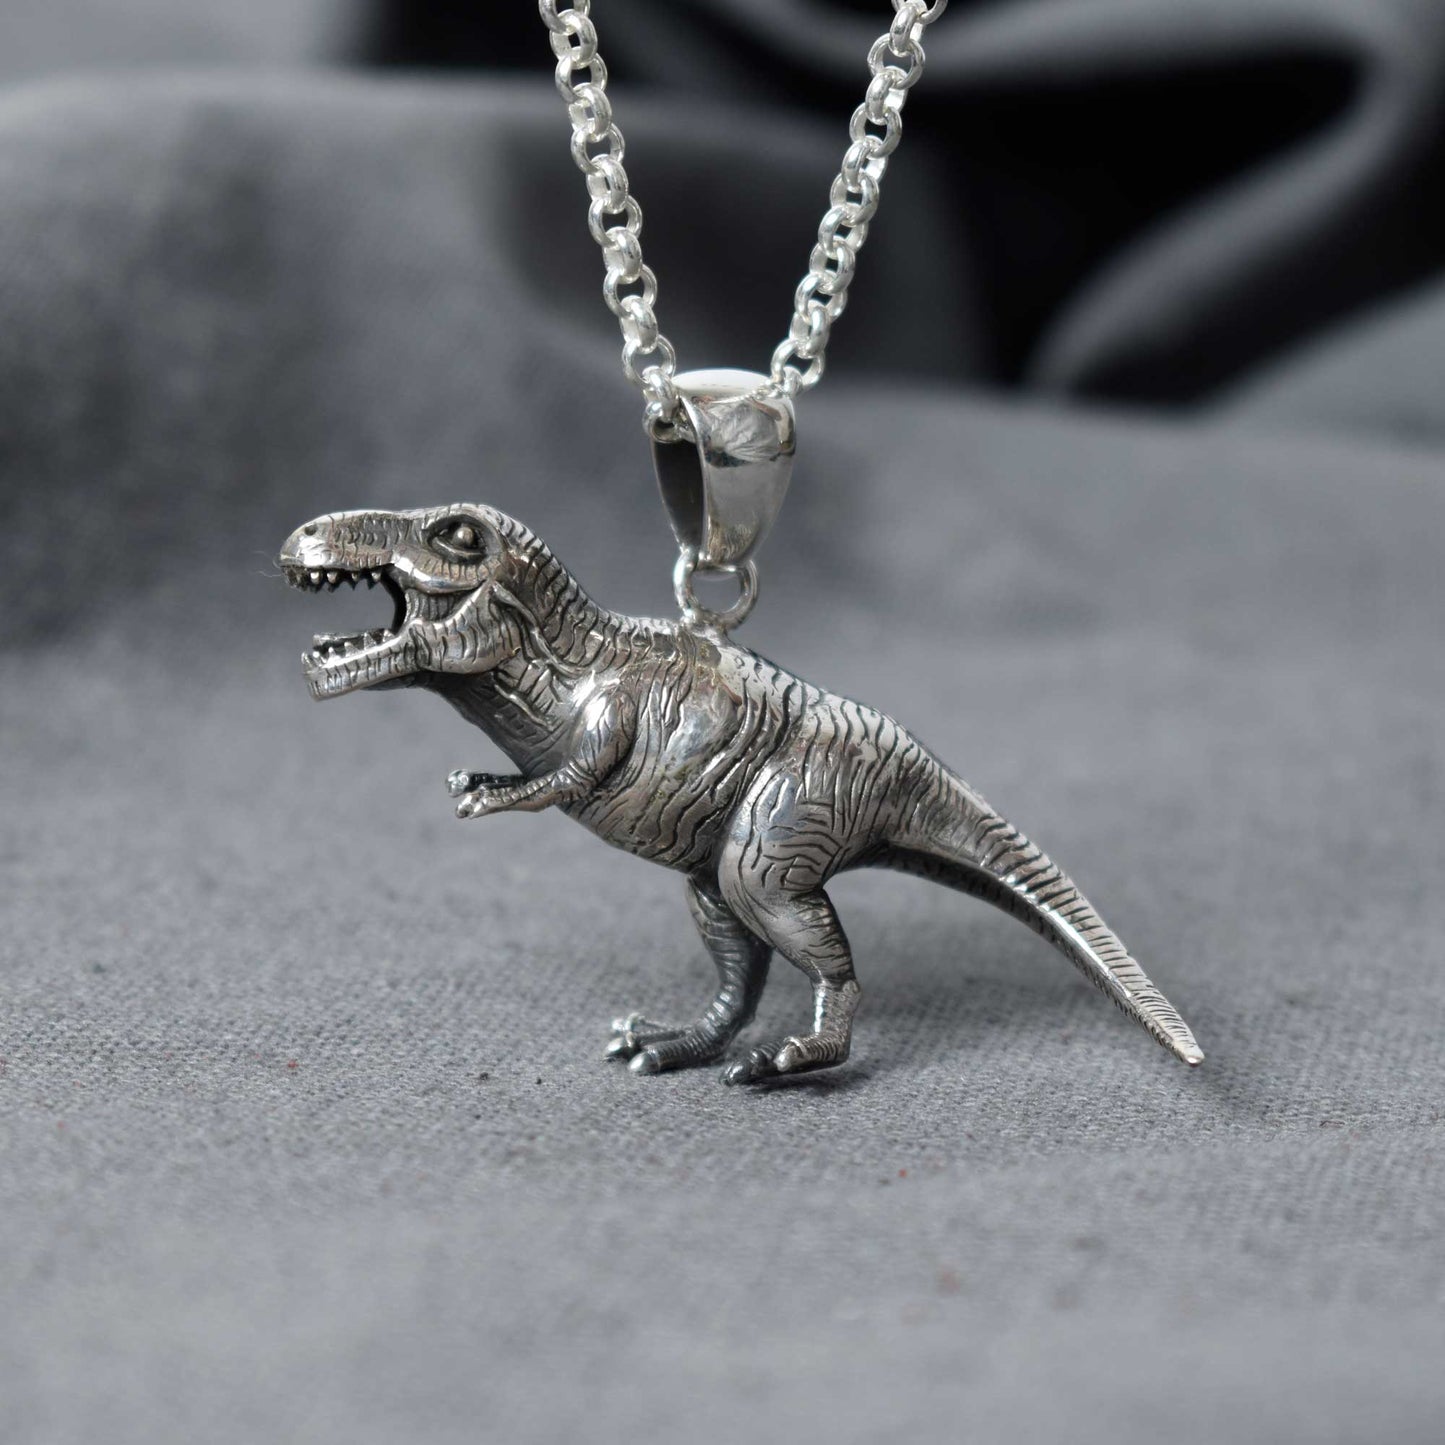 Tyrannosaurus Rex T-Rex 925 Sterling Silver Charm Necklace Pendant Jewelry